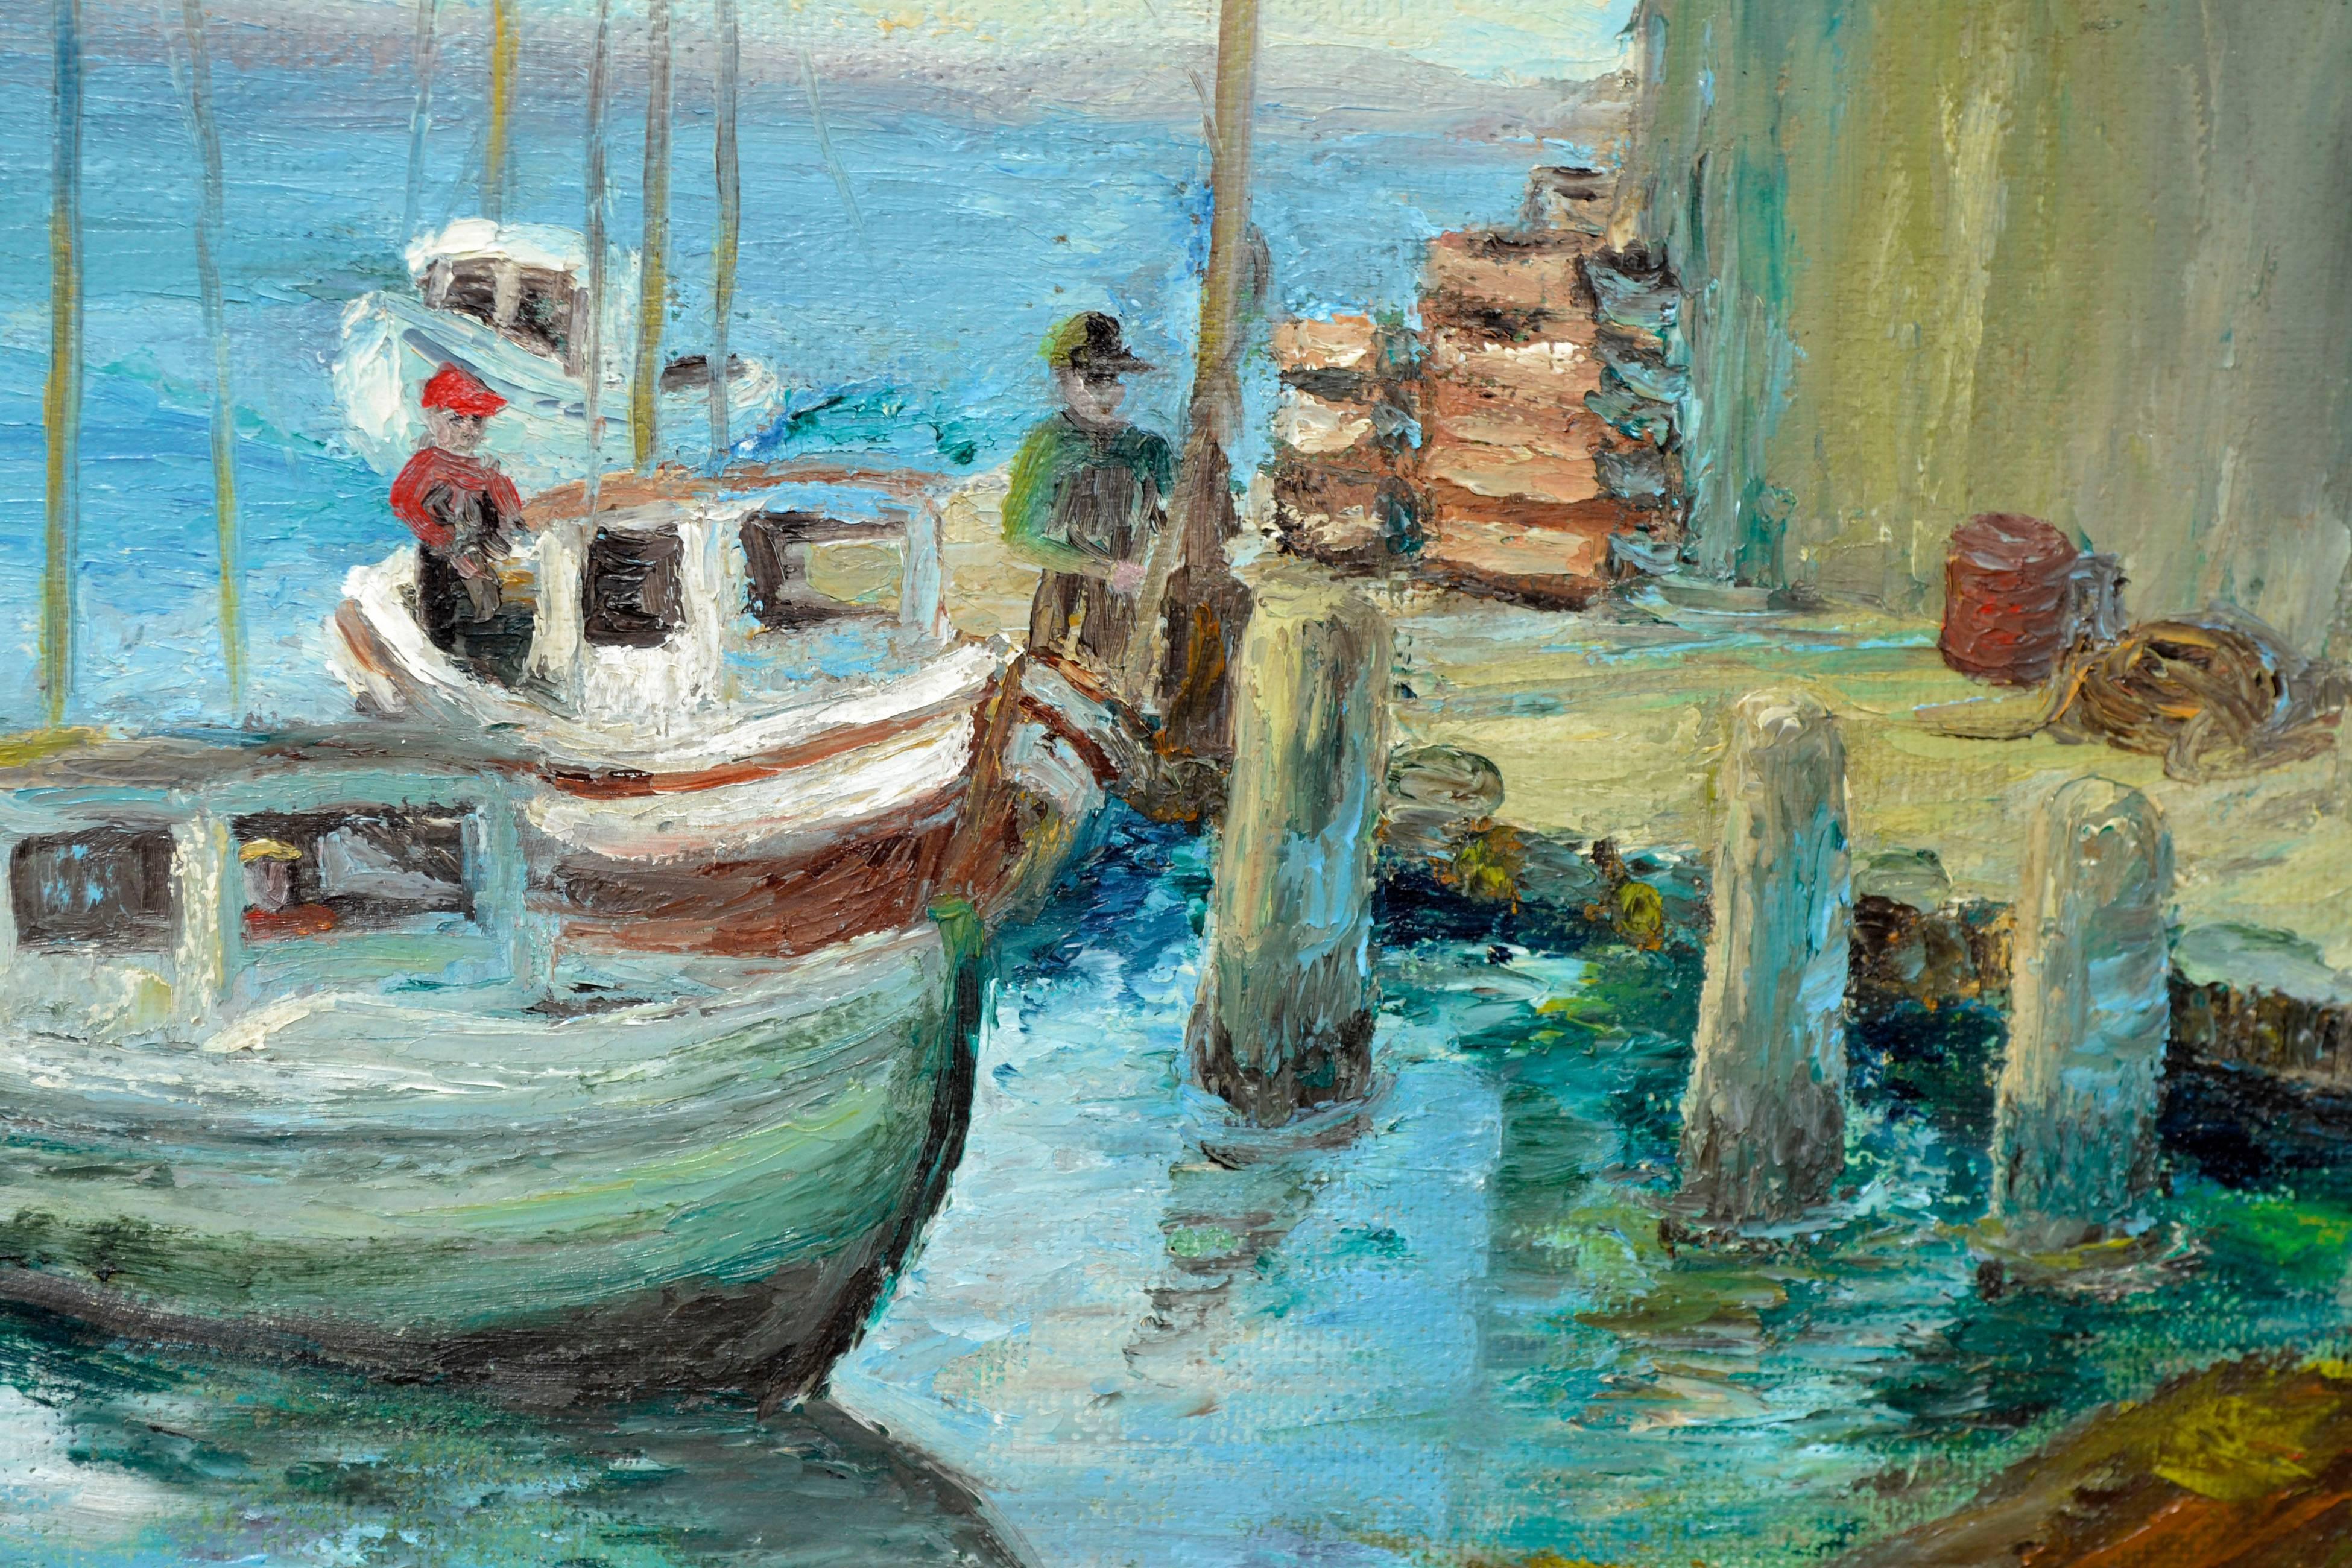 Fishermen at the Dock, Monterey - Mid Century Figurative Landscape  - American Impressionist Painting by Unknown